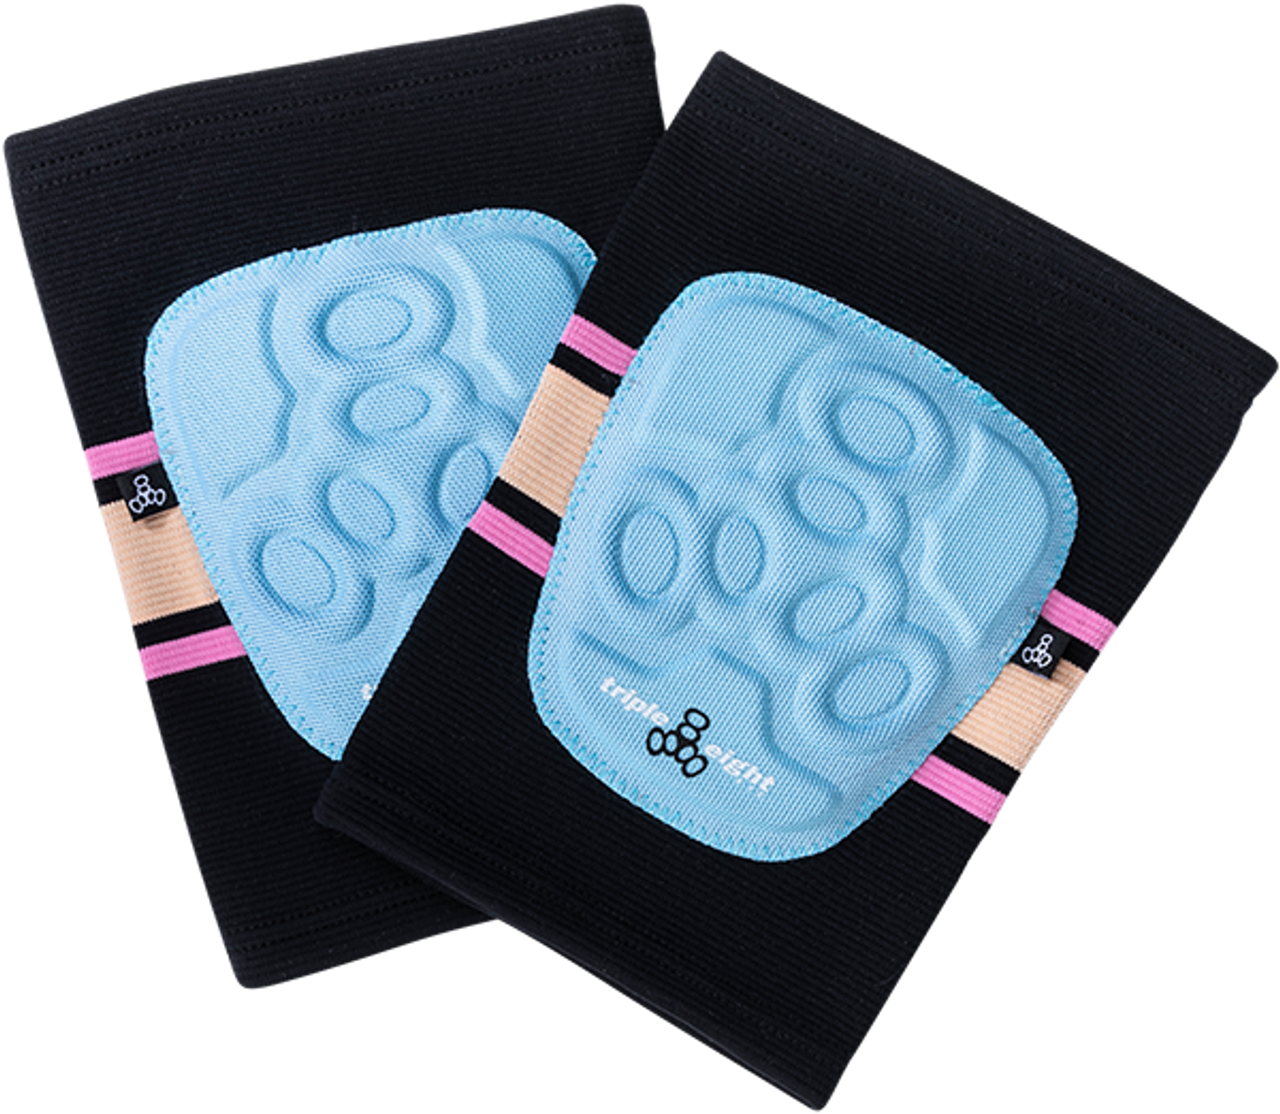 TRIPLE 8 COVERT ELBOW PAD SMALL SUNSET